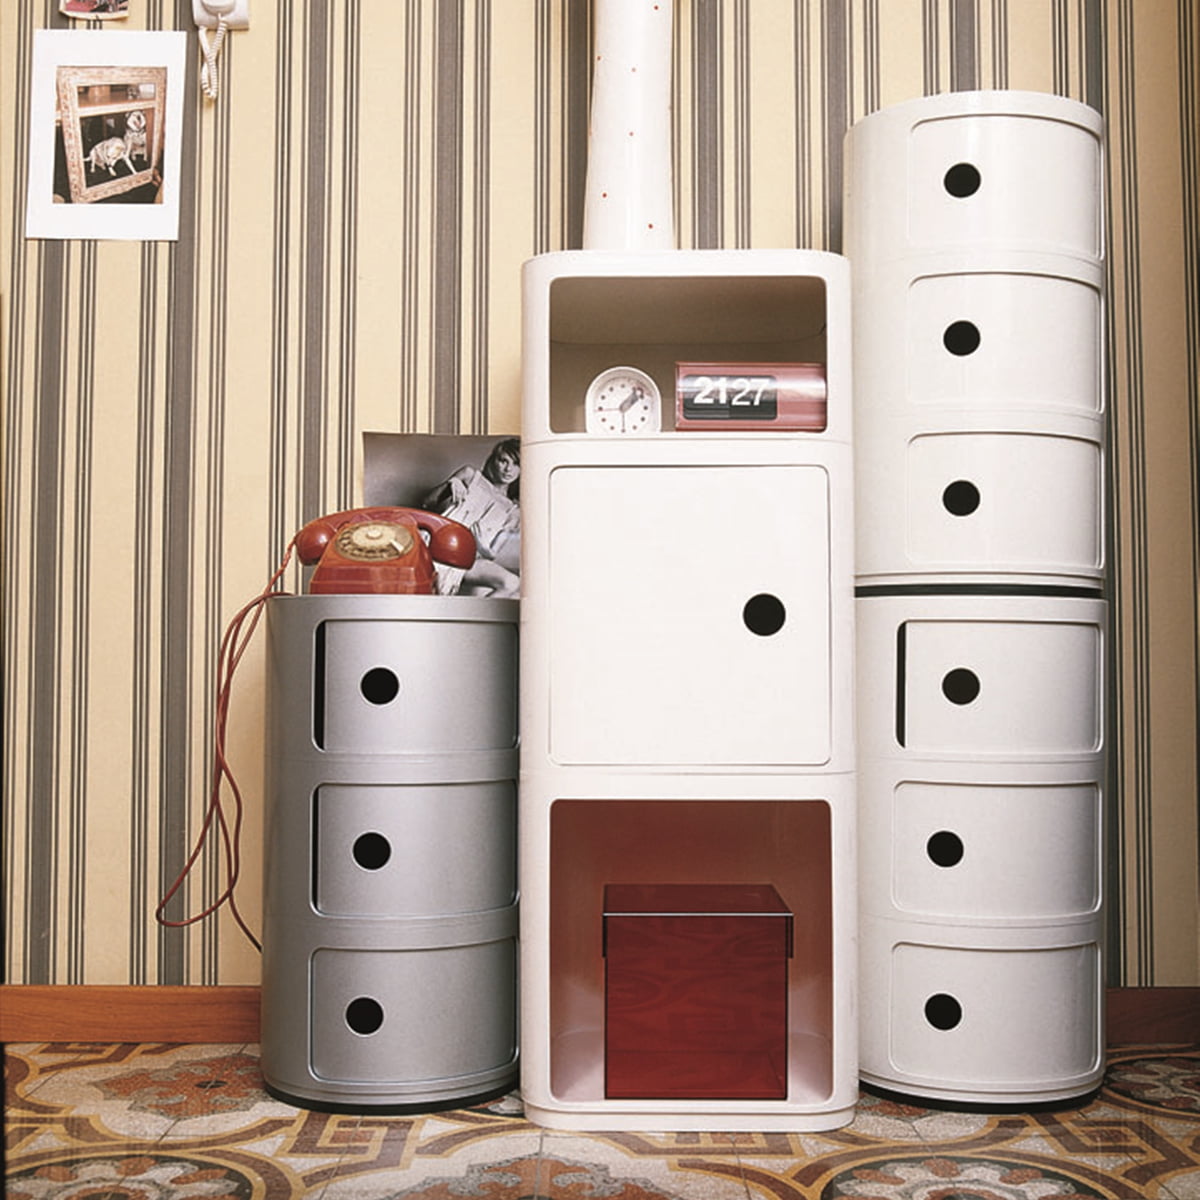 Kartell - Componibili 4967